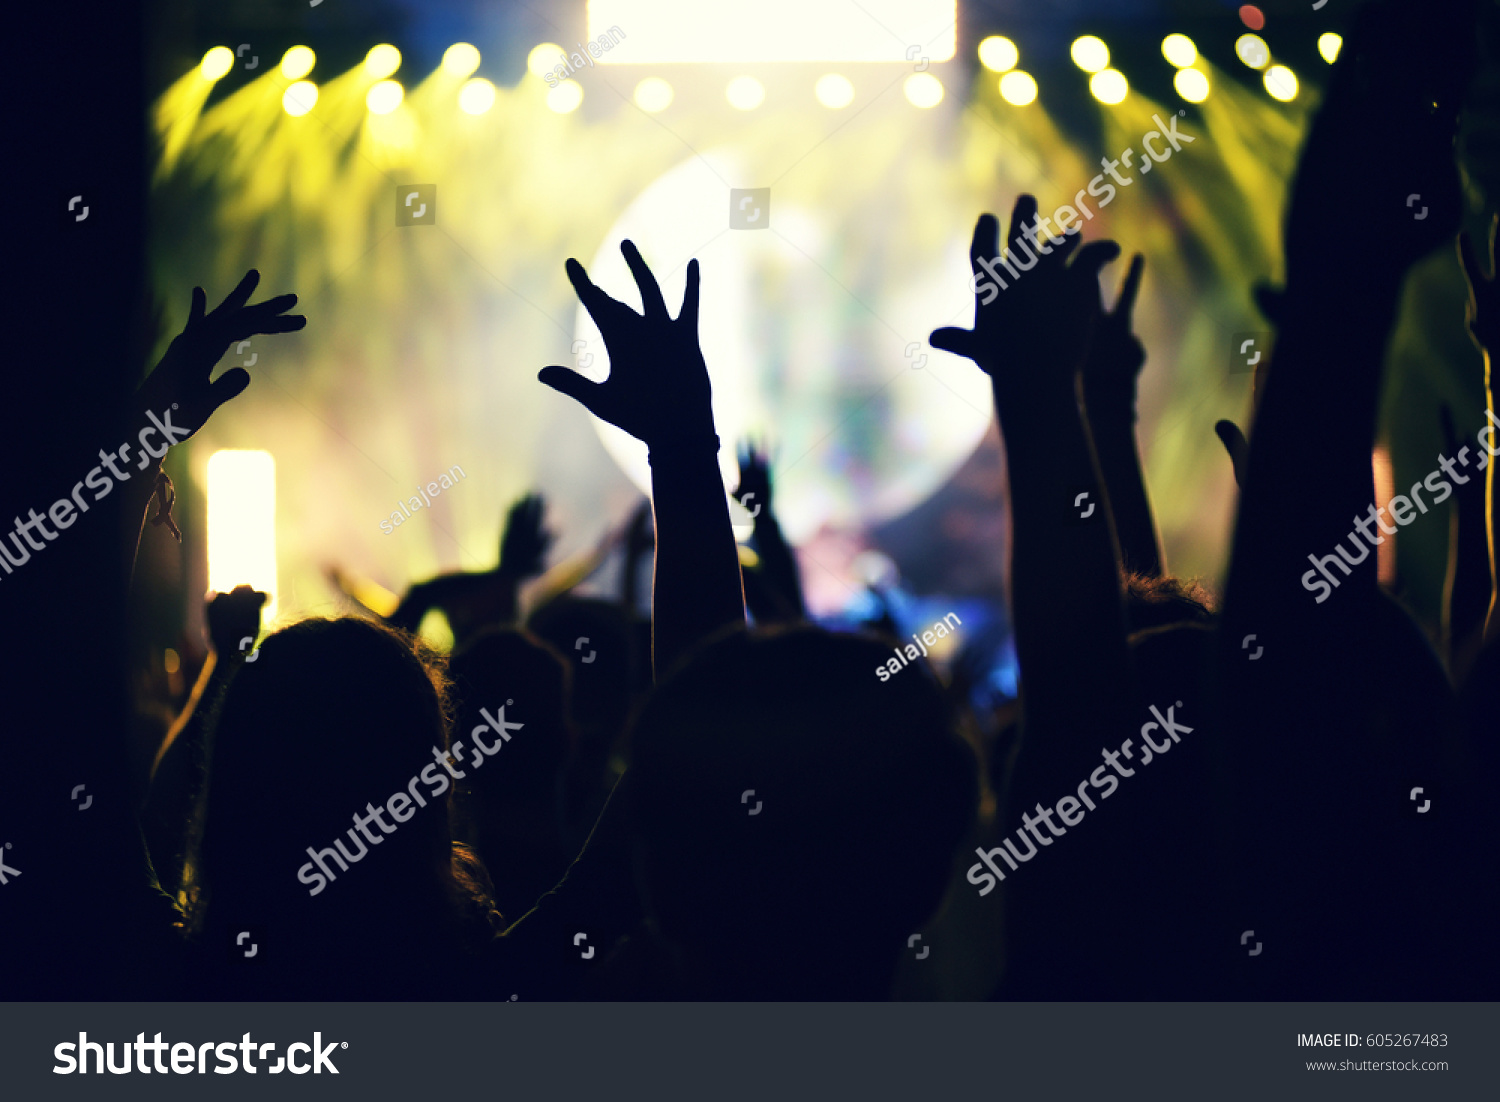 Crowd rocking during a concert with raised arms. Toned image #605267483